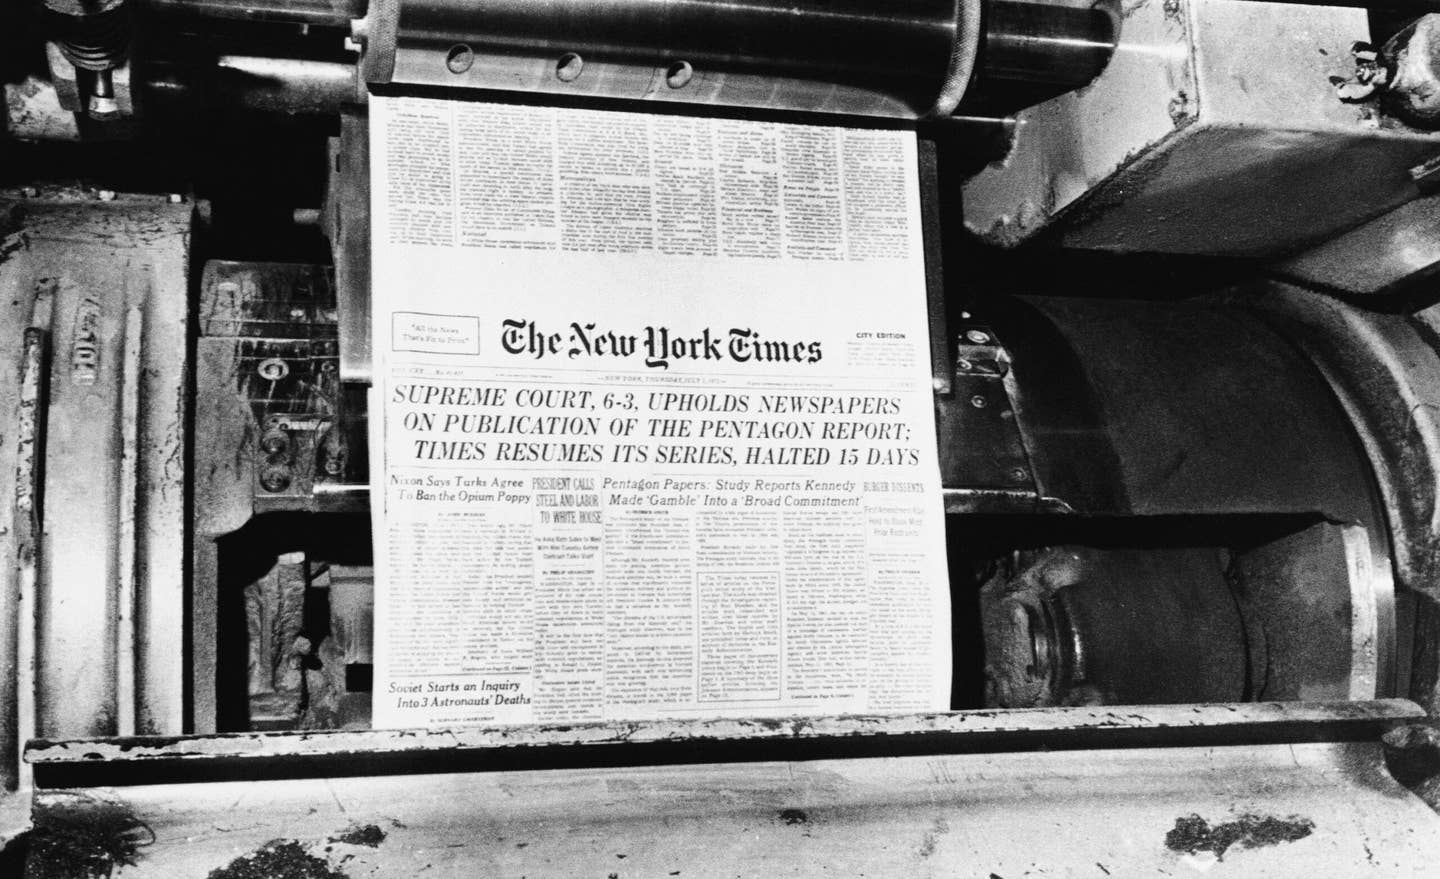 The New York Times resumed publication of its series of articles based on the secret Pentagon papers in its July 1, 1971 edition, after it was given the green light by the U.S. Supreme Court. (AP Photo/Jim Wells)